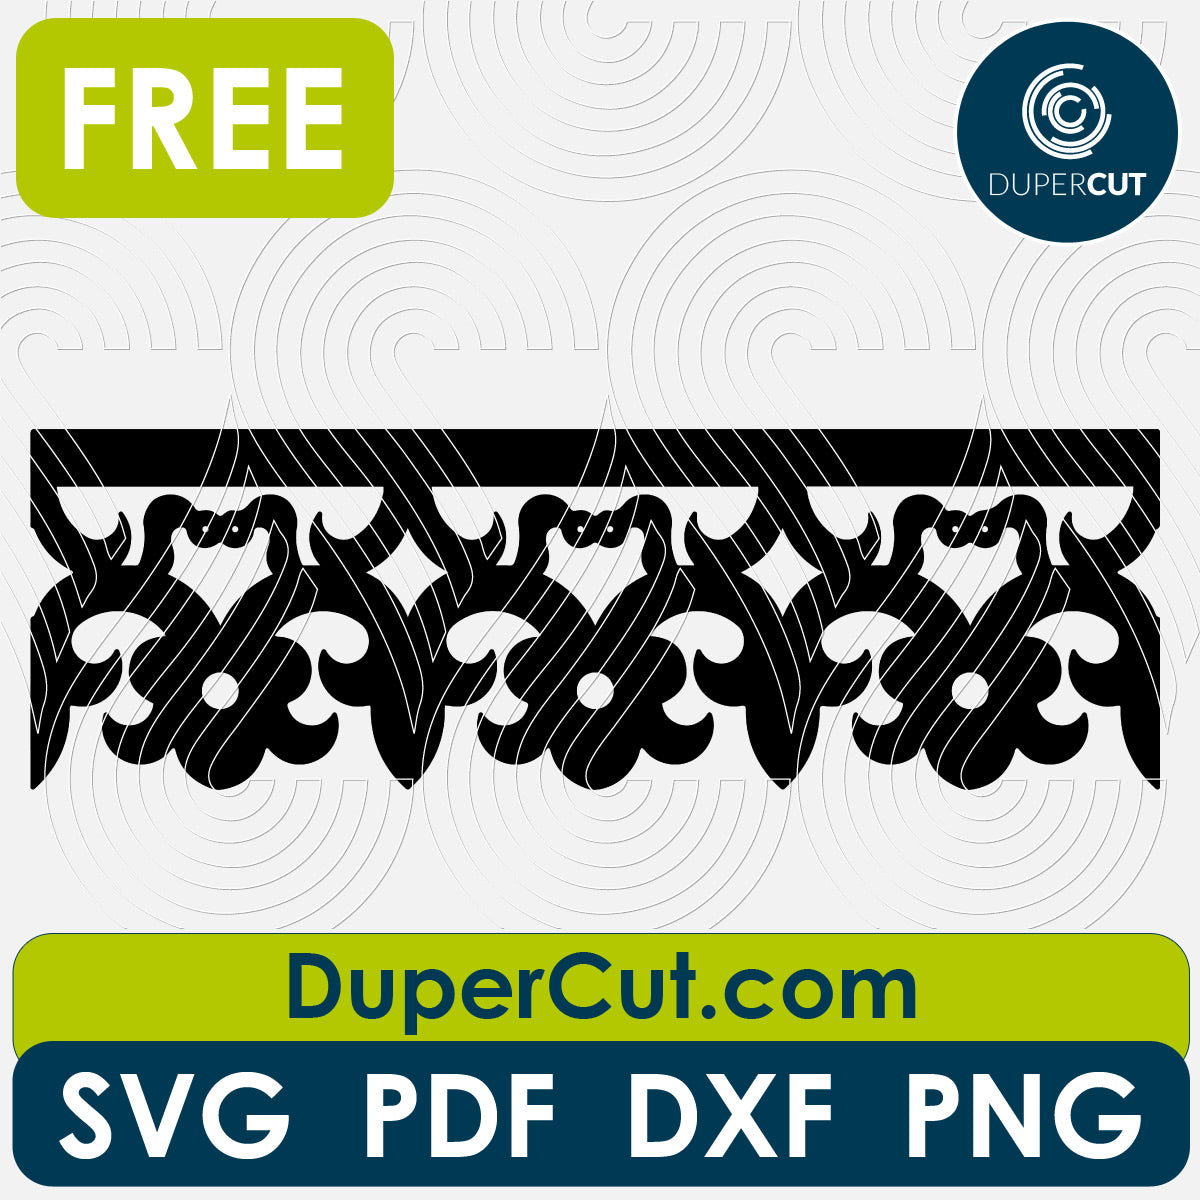 Border pattern seamless, FREE cutting template SVG PNG DXF files for Glowforge, Cricut, Silhouette, CNC laser router by DuperCut.com